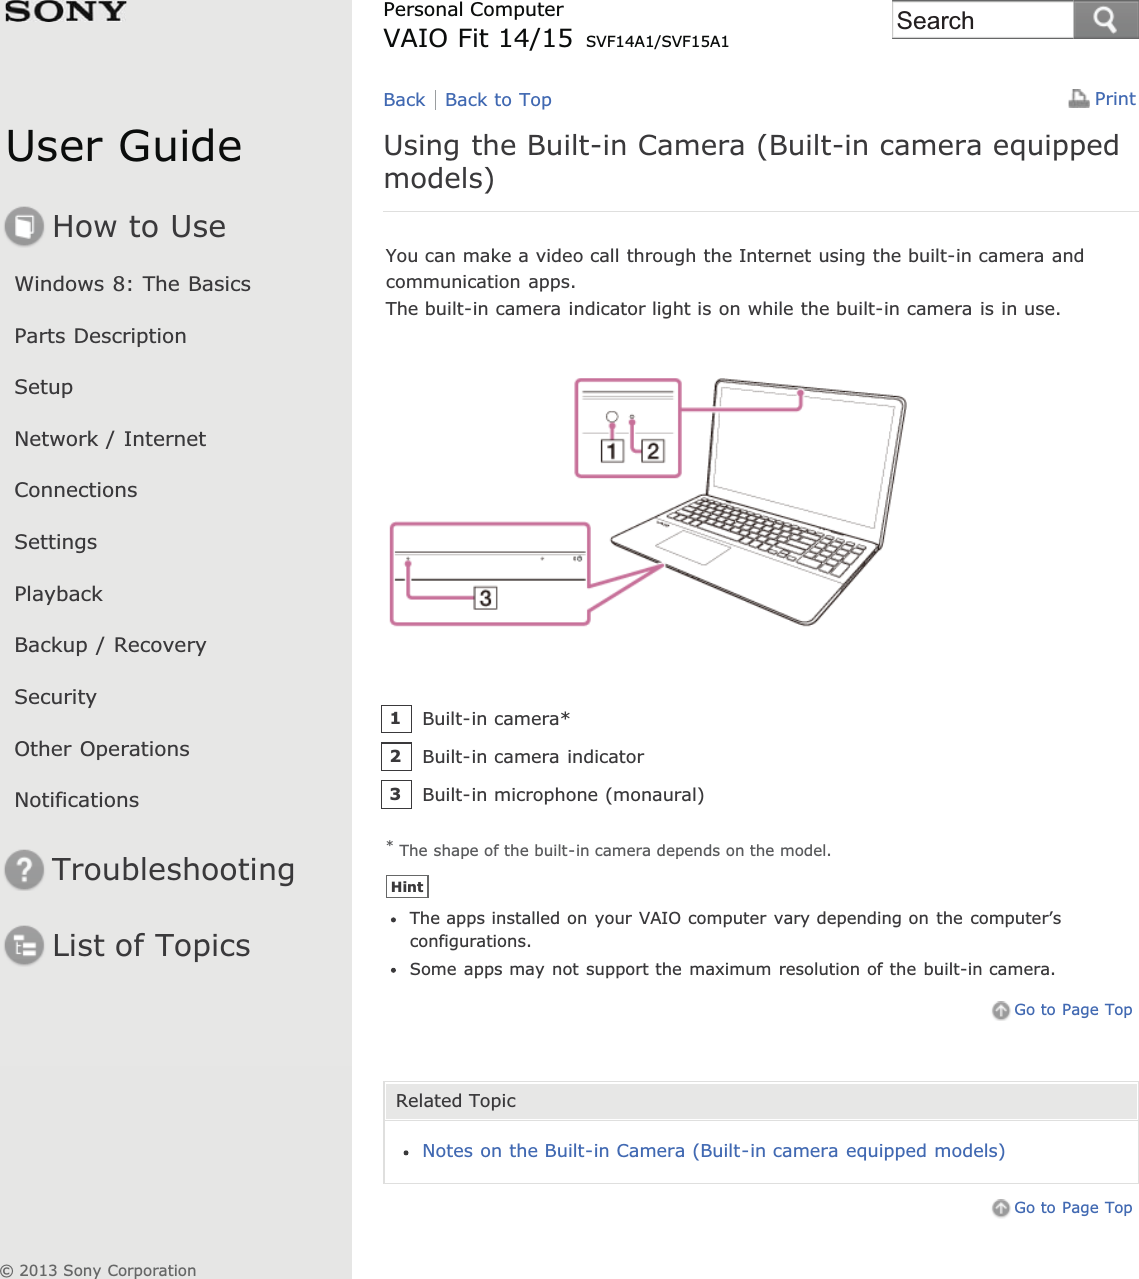 User GuideHow to UseWindows 8: The BasicsParts DescriptionSetupNetwork / InternetConnectionsSettingsPlaybackBackup / RecoverySecurityOther OperationsNotificationsTroubleshootingList of TopicsPrintPersonal ComputerVAIO Fit 14/15 SVF14A1/SVF15A1Using the Built-in Camera (Built-in camera equippedmodels)You can make a video call through the Internet using the built-in camera andcommunication apps.The built-in camera indicator light is on while the built-in camera is in use.* The shape of the built-in camera depends on the model.HintThe apps installed on your VAIO computer vary depending on the computer’sconfigurations.Some apps may not support the maximum resolution of the built-in camera.Go to Page TopRelated TopicNotes on the Built-in Camera (Built-in camera equipped models)Go to Page TopBack Back to TopBuilt-in camera*1Built-in camera indicator2Built-in microphone (monaural)3© 2013 Sony CorporationSearch